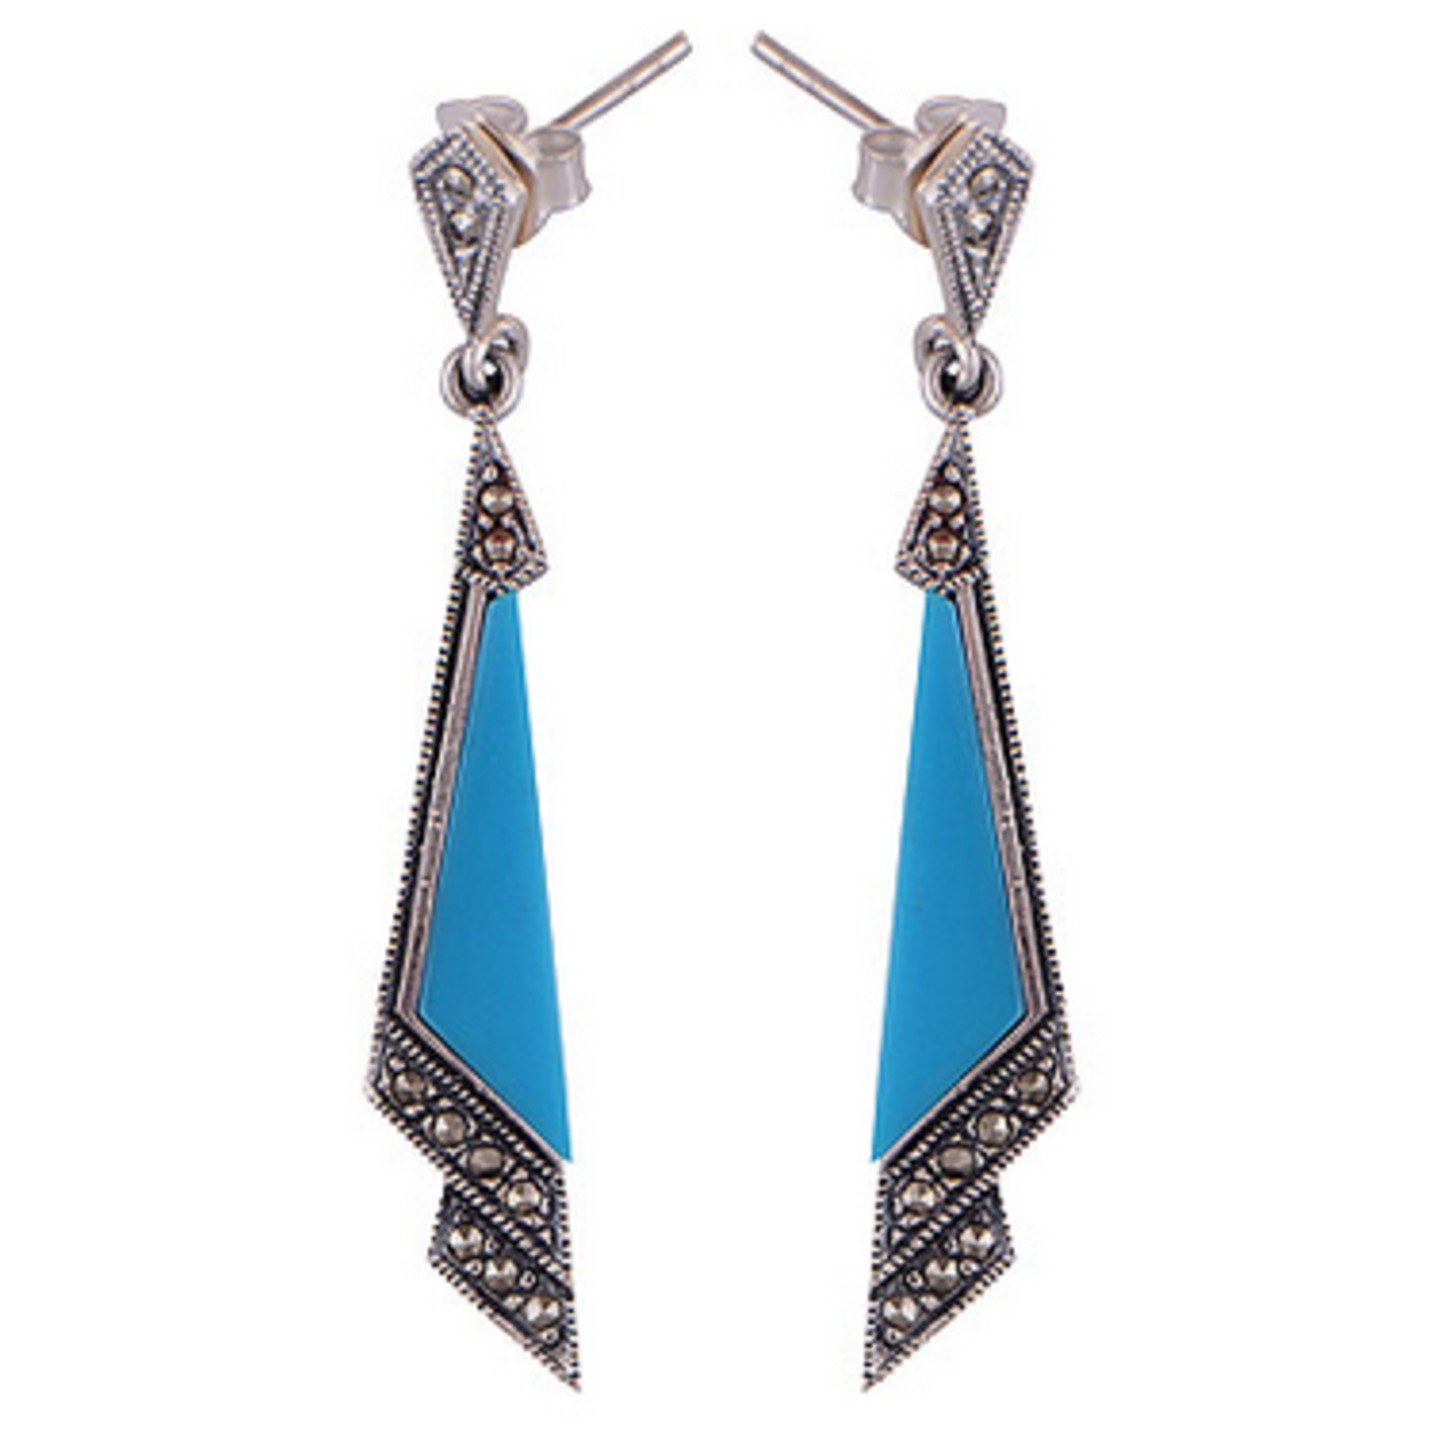 The Turquoise Angle Marcasite Cut Stone Studs